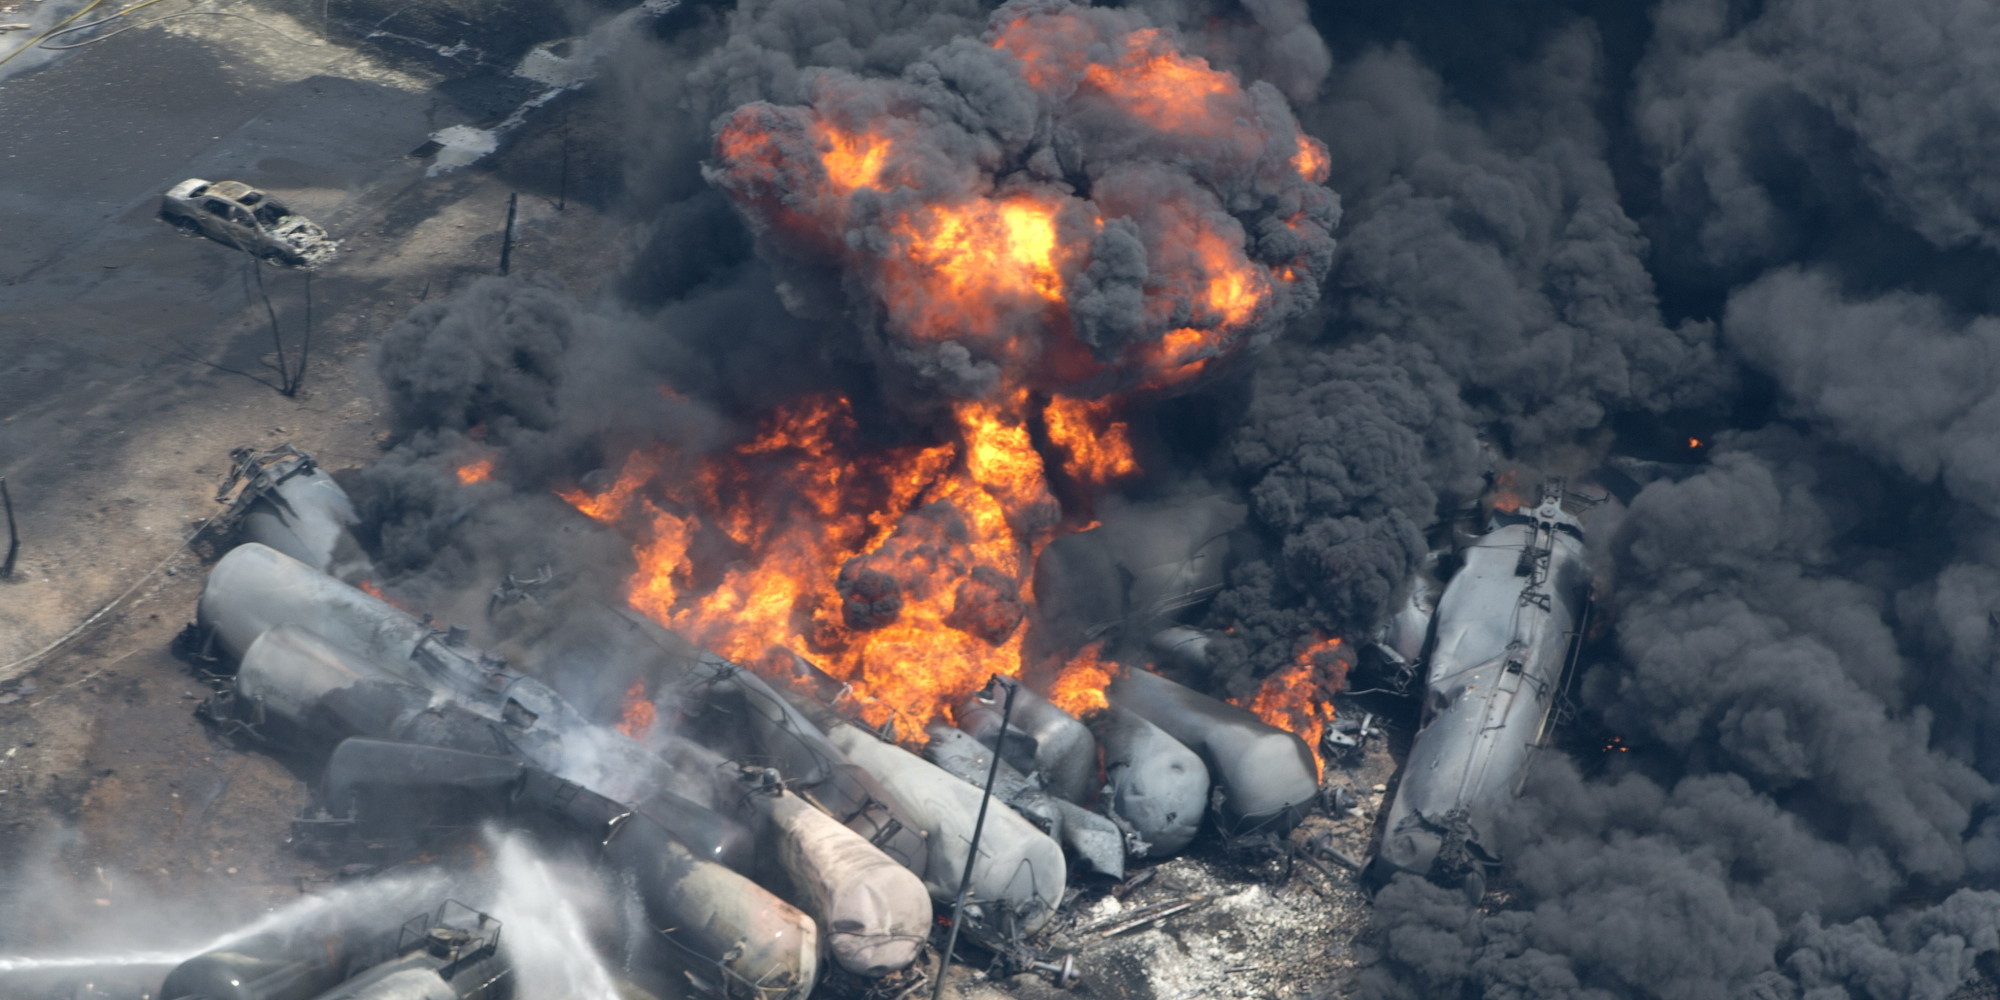 A Year on from Lac-Mégantic Disaster, Demand Action on Crude By Rail